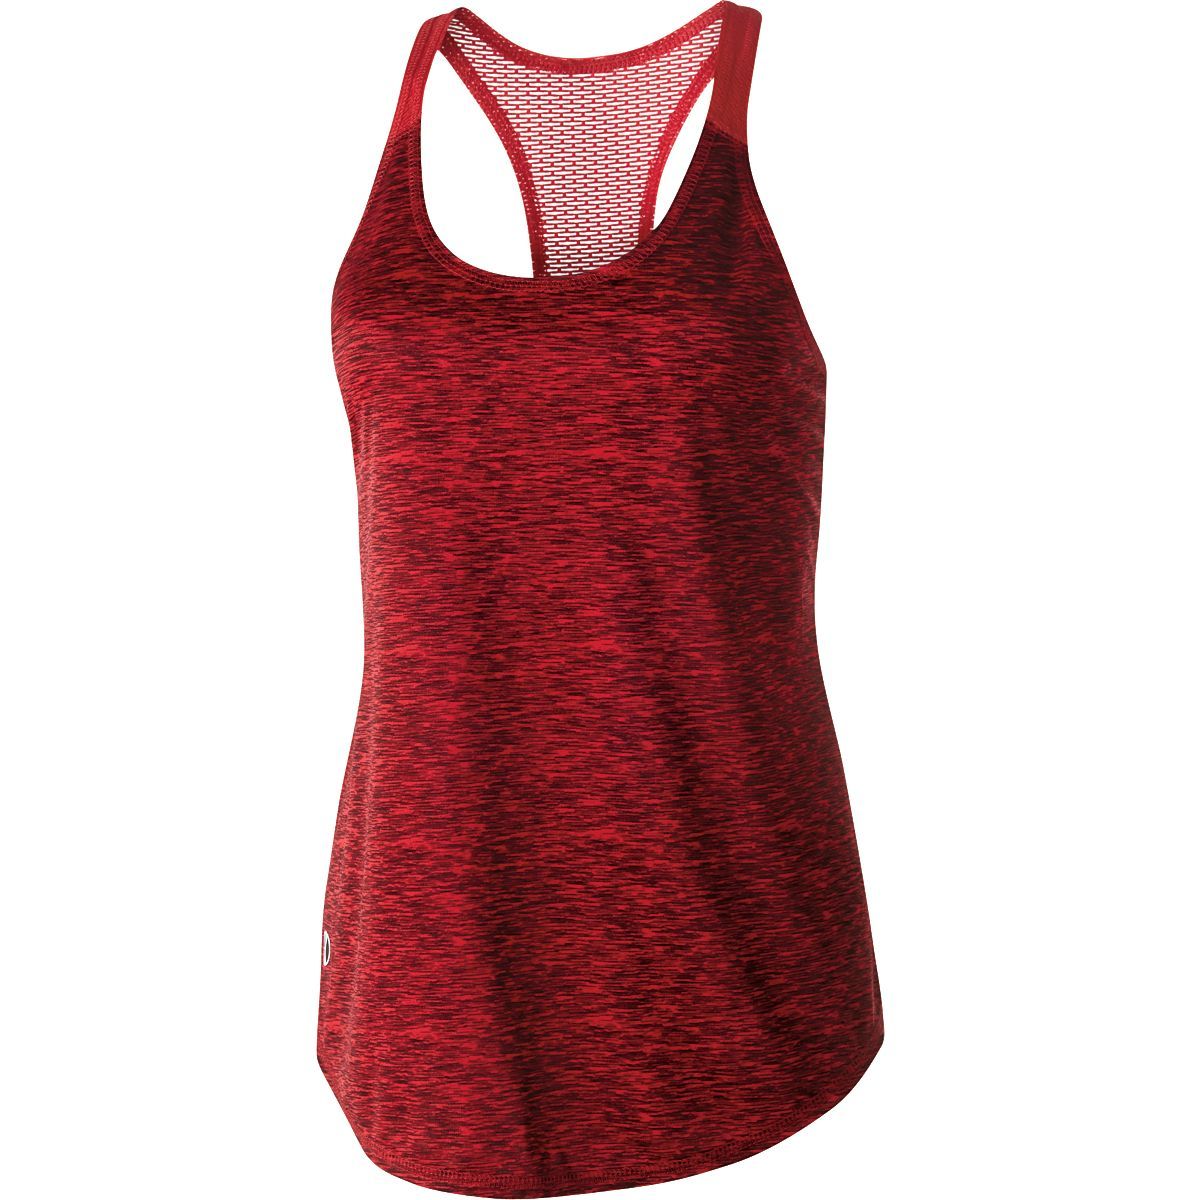 Holloway Ladies Space Dye Tank in Red/Scarlet  -Part of the Ladies, Ladies-Tank, Holloway, Shirts product lines at KanaleyCreations.com